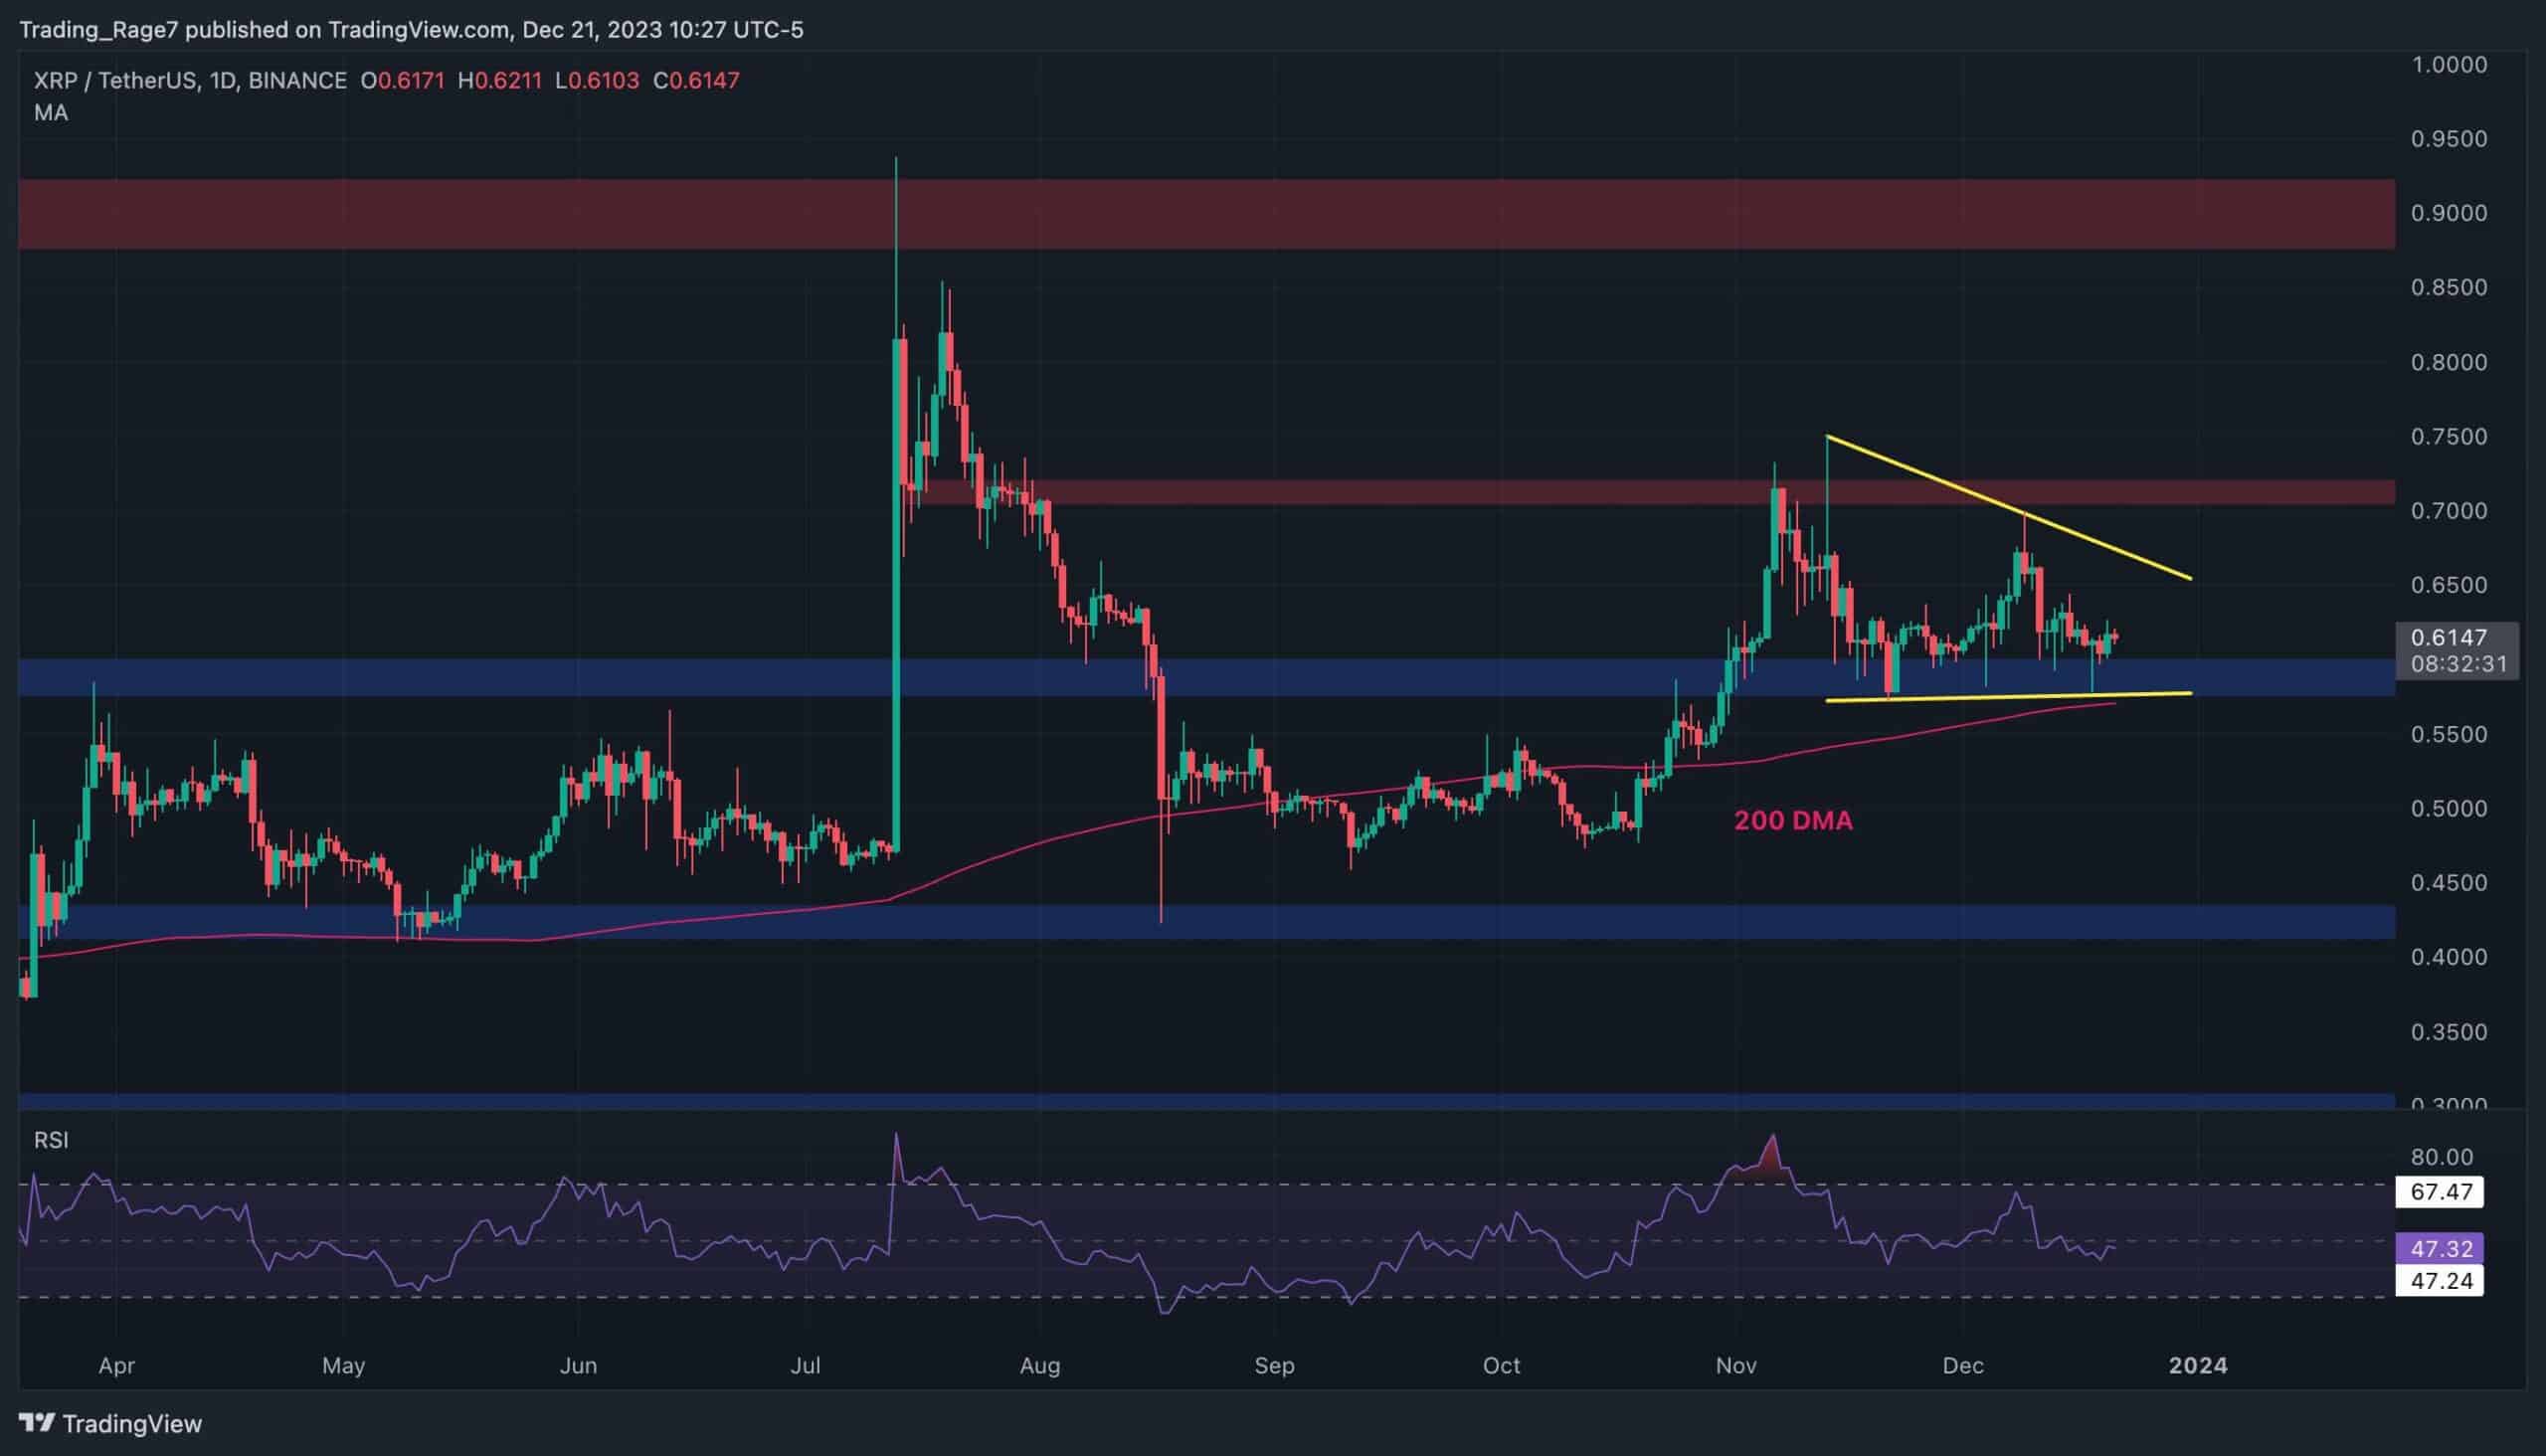 Calm-before-the-storm:-is-xrp-about-to-explode-following-consolidation?-(ripple-price-analysis)